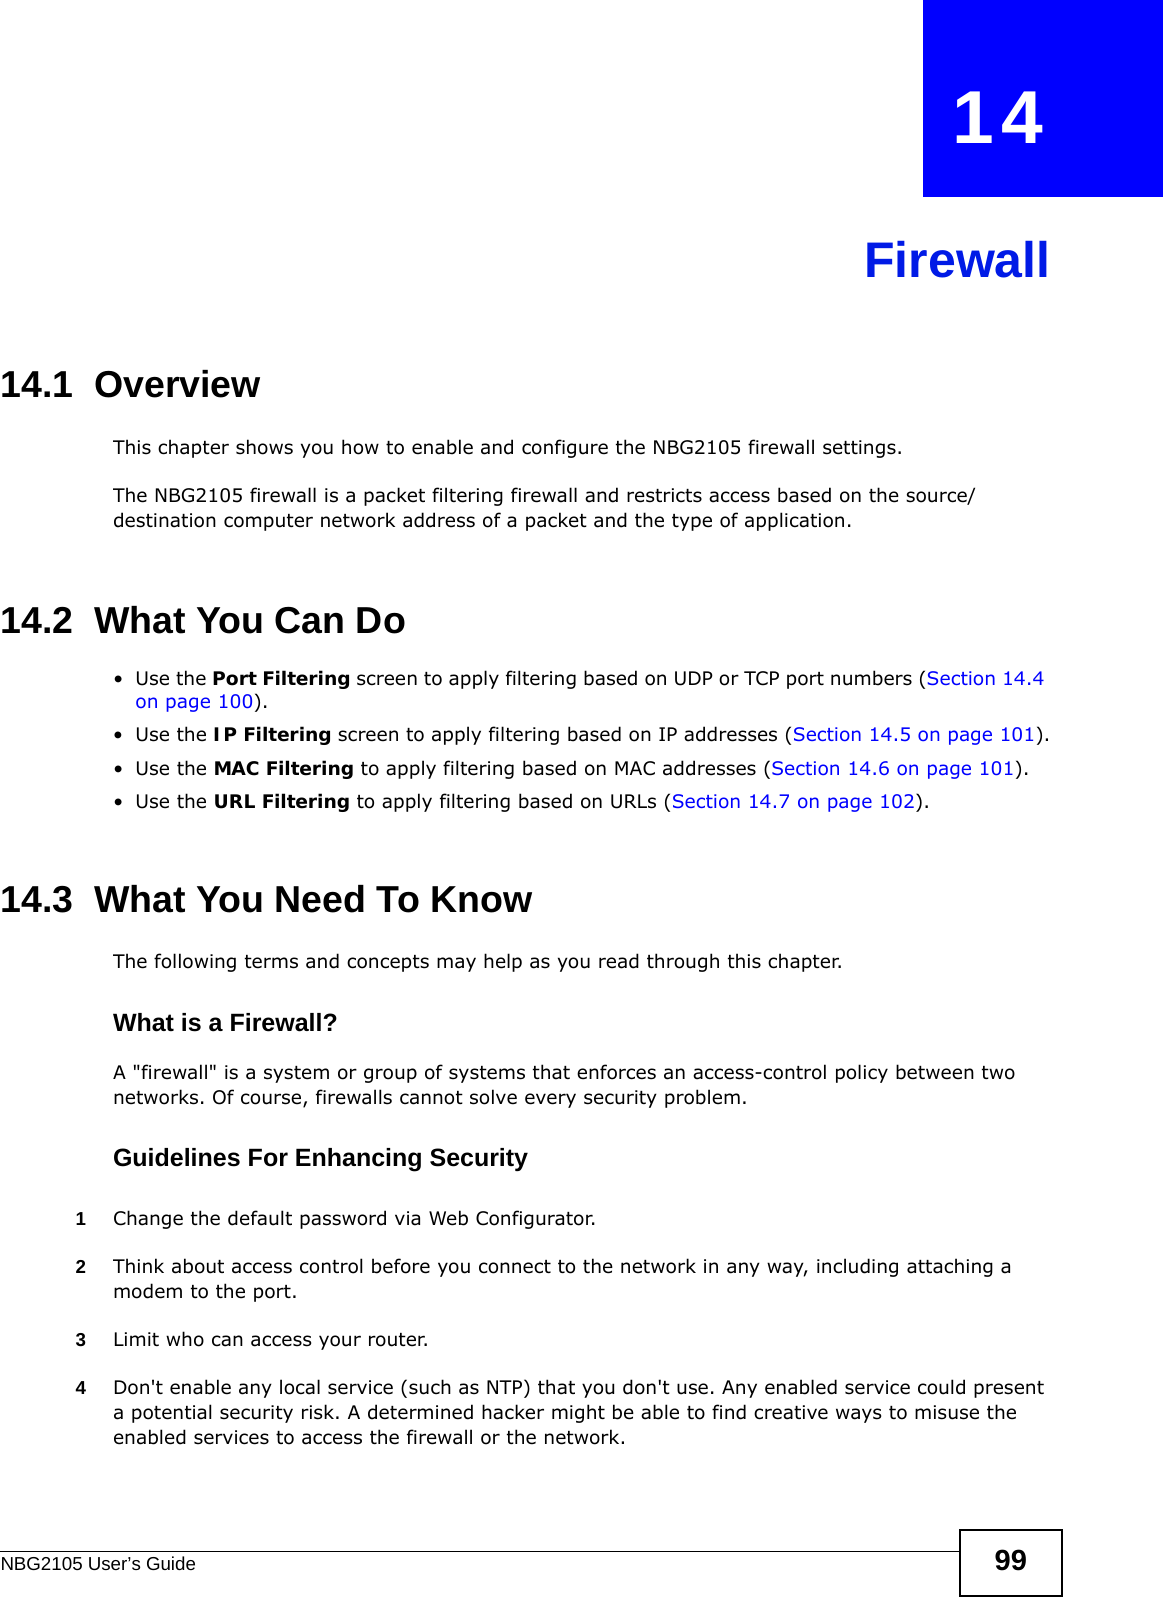 NBG2105 User’s Guide 99CHAPTER   14Firewall14.1  OverviewThis chapter shows you how to enable and configure the NBG2105 firewall settings.The NBG2105 firewall is a packet filtering firewall and restricts access based on the source/destination computer network address of a packet and the type of application. 14.2  What You Can Do•Use the Port Filtering screen to apply filtering based on UDP or TCP port numbers (Section 14.4 on page 100). •Use the IP Filtering screen to apply filtering based on IP addresses (Section 14.5 on page 101).•Use the MAC Filtering to apply filtering based on MAC addresses (Section 14.6 on page 101).•Use the URL Filtering to apply filtering based on URLs (Section 14.7 on page 102).14.3  What You Need To KnowThe following terms and concepts may help as you read through this chapter.What is a Firewall?A &quot;firewall&quot; is a system or group of systems that enforces an access-control policy between two networks. Of course, firewalls cannot solve every security problem. Guidelines For Enhancing Security1Change the default password via Web Configurator. 2Think about access control before you connect to the network in any way, including attaching a modem to the port. 3Limit who can access your router. 4Don&apos;t enable any local service (such as NTP) that you don&apos;t use. Any enabled service could present a potential security risk. A determined hacker might be able to find creative ways to misuse the enabled services to access the firewall or the network. 